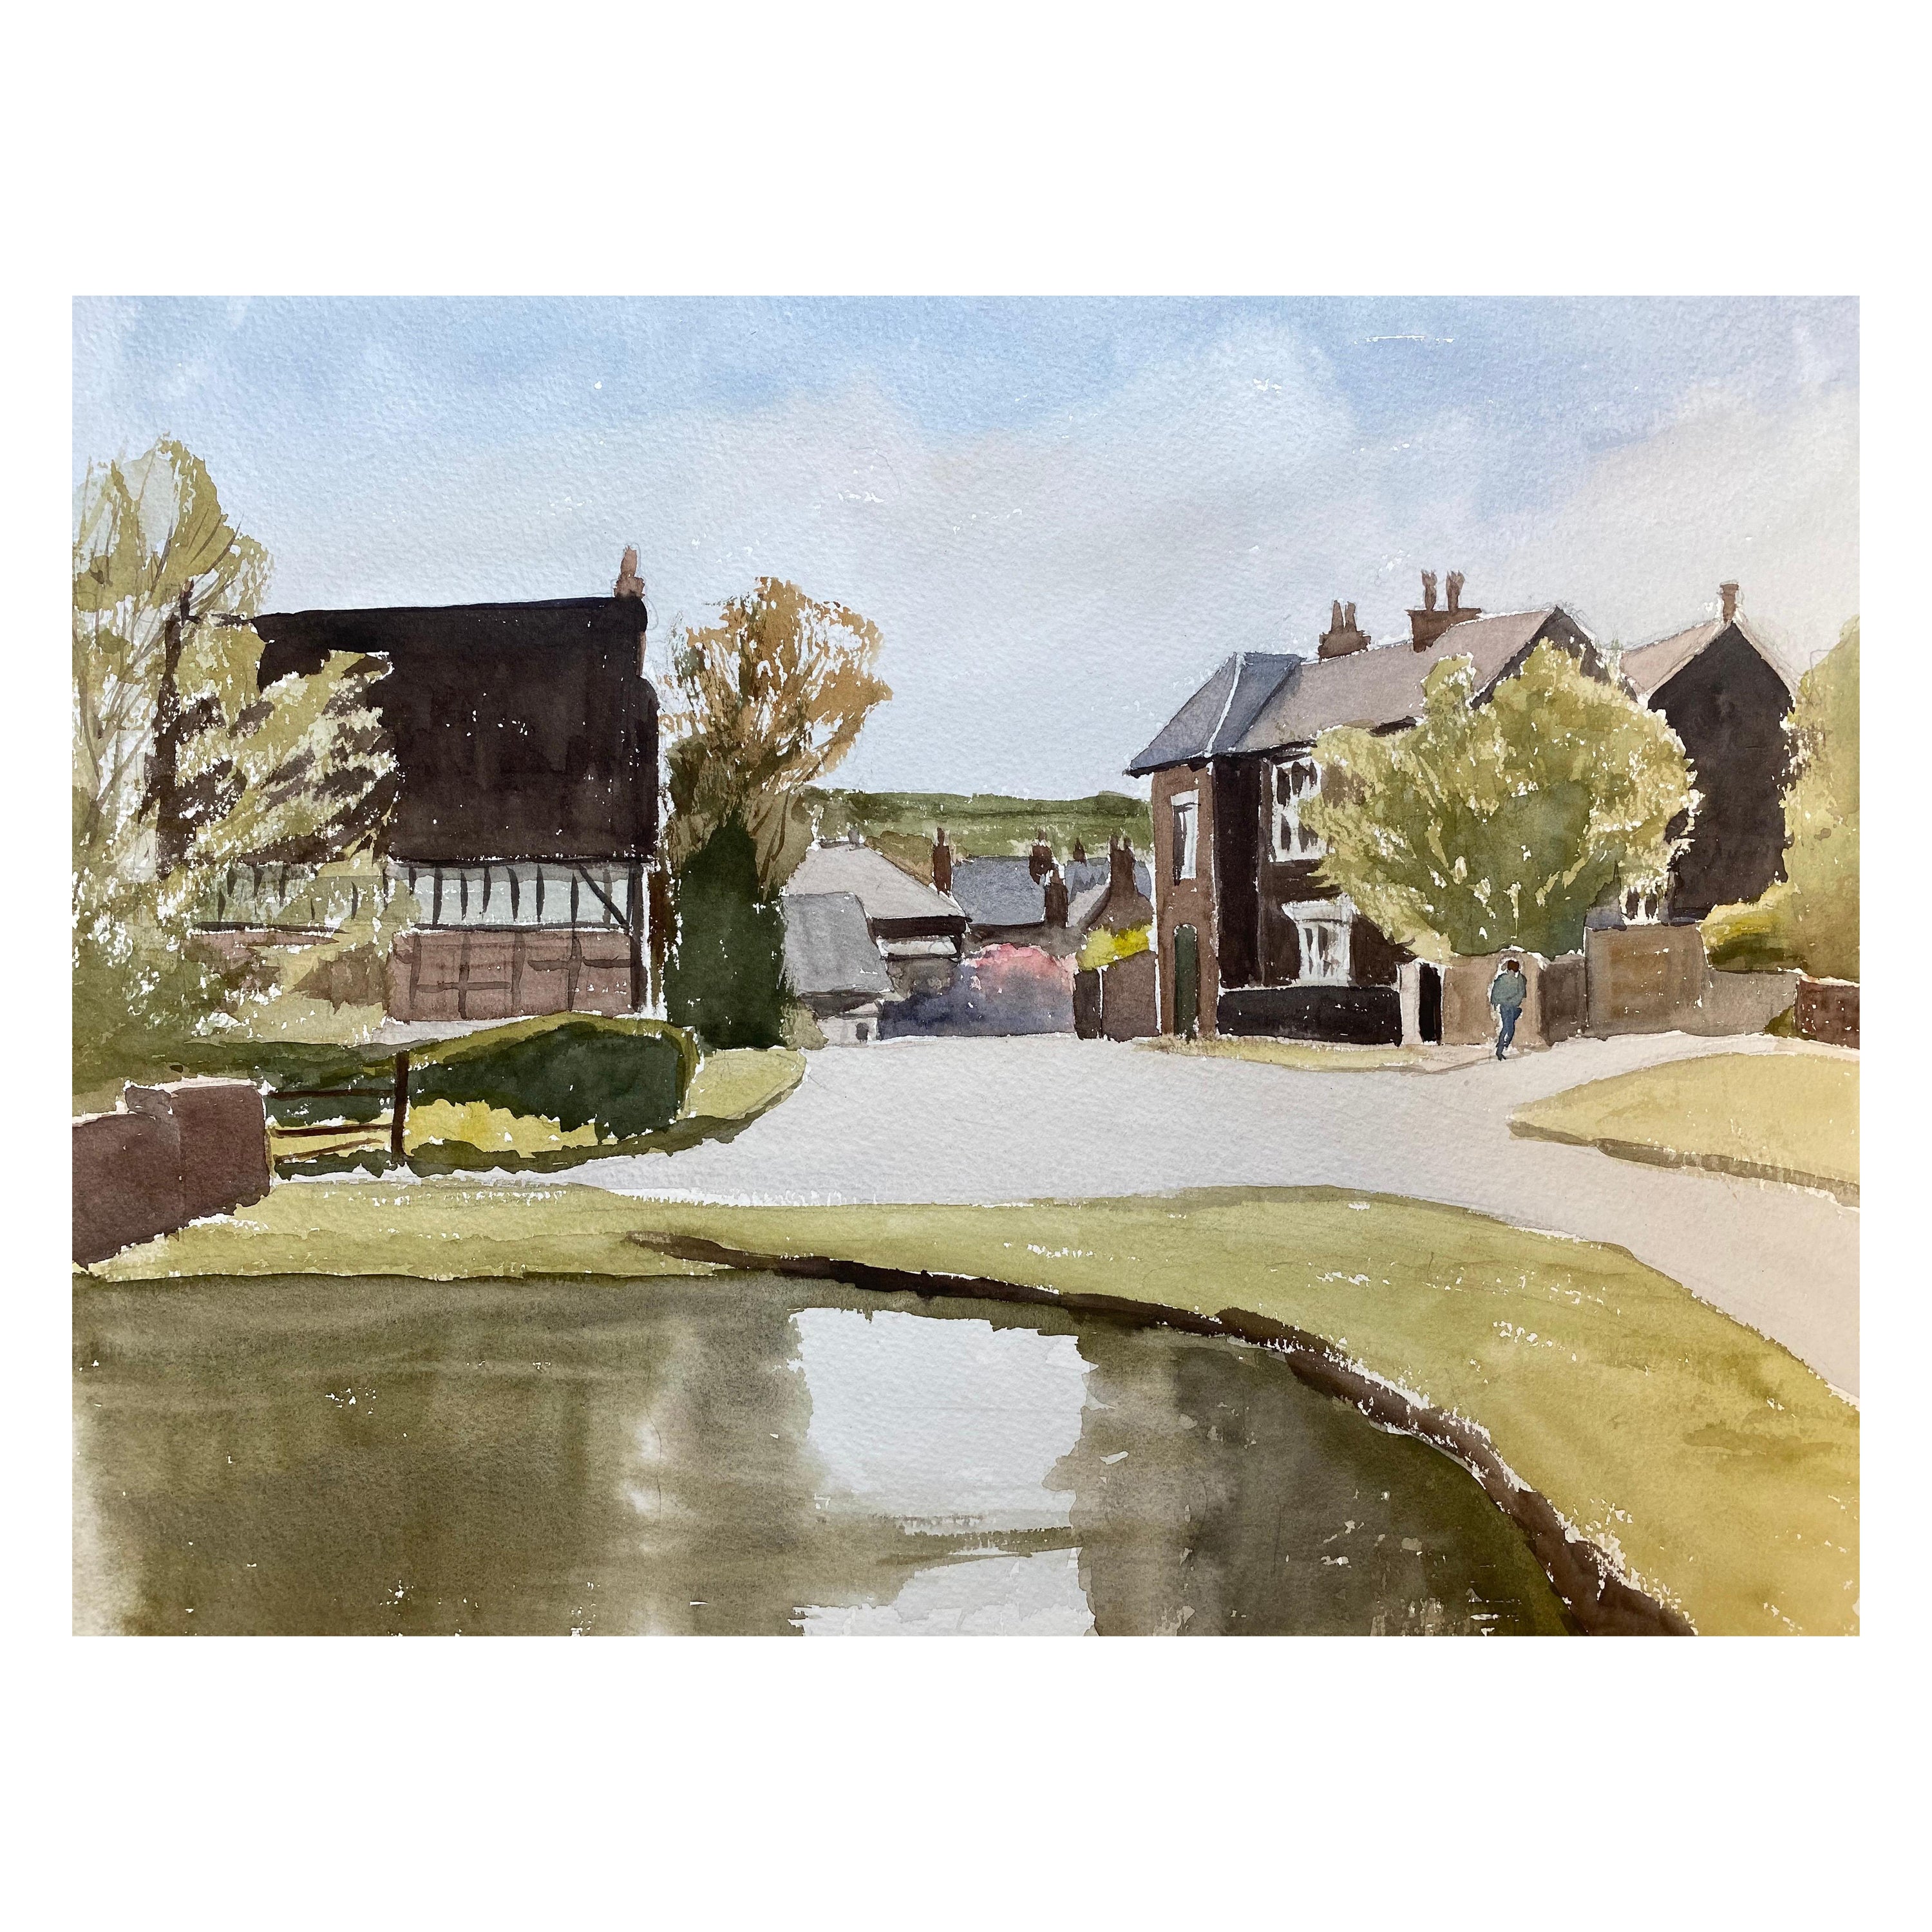 English Rural Country Village, Signed Original British Watercolour Painting For Sale